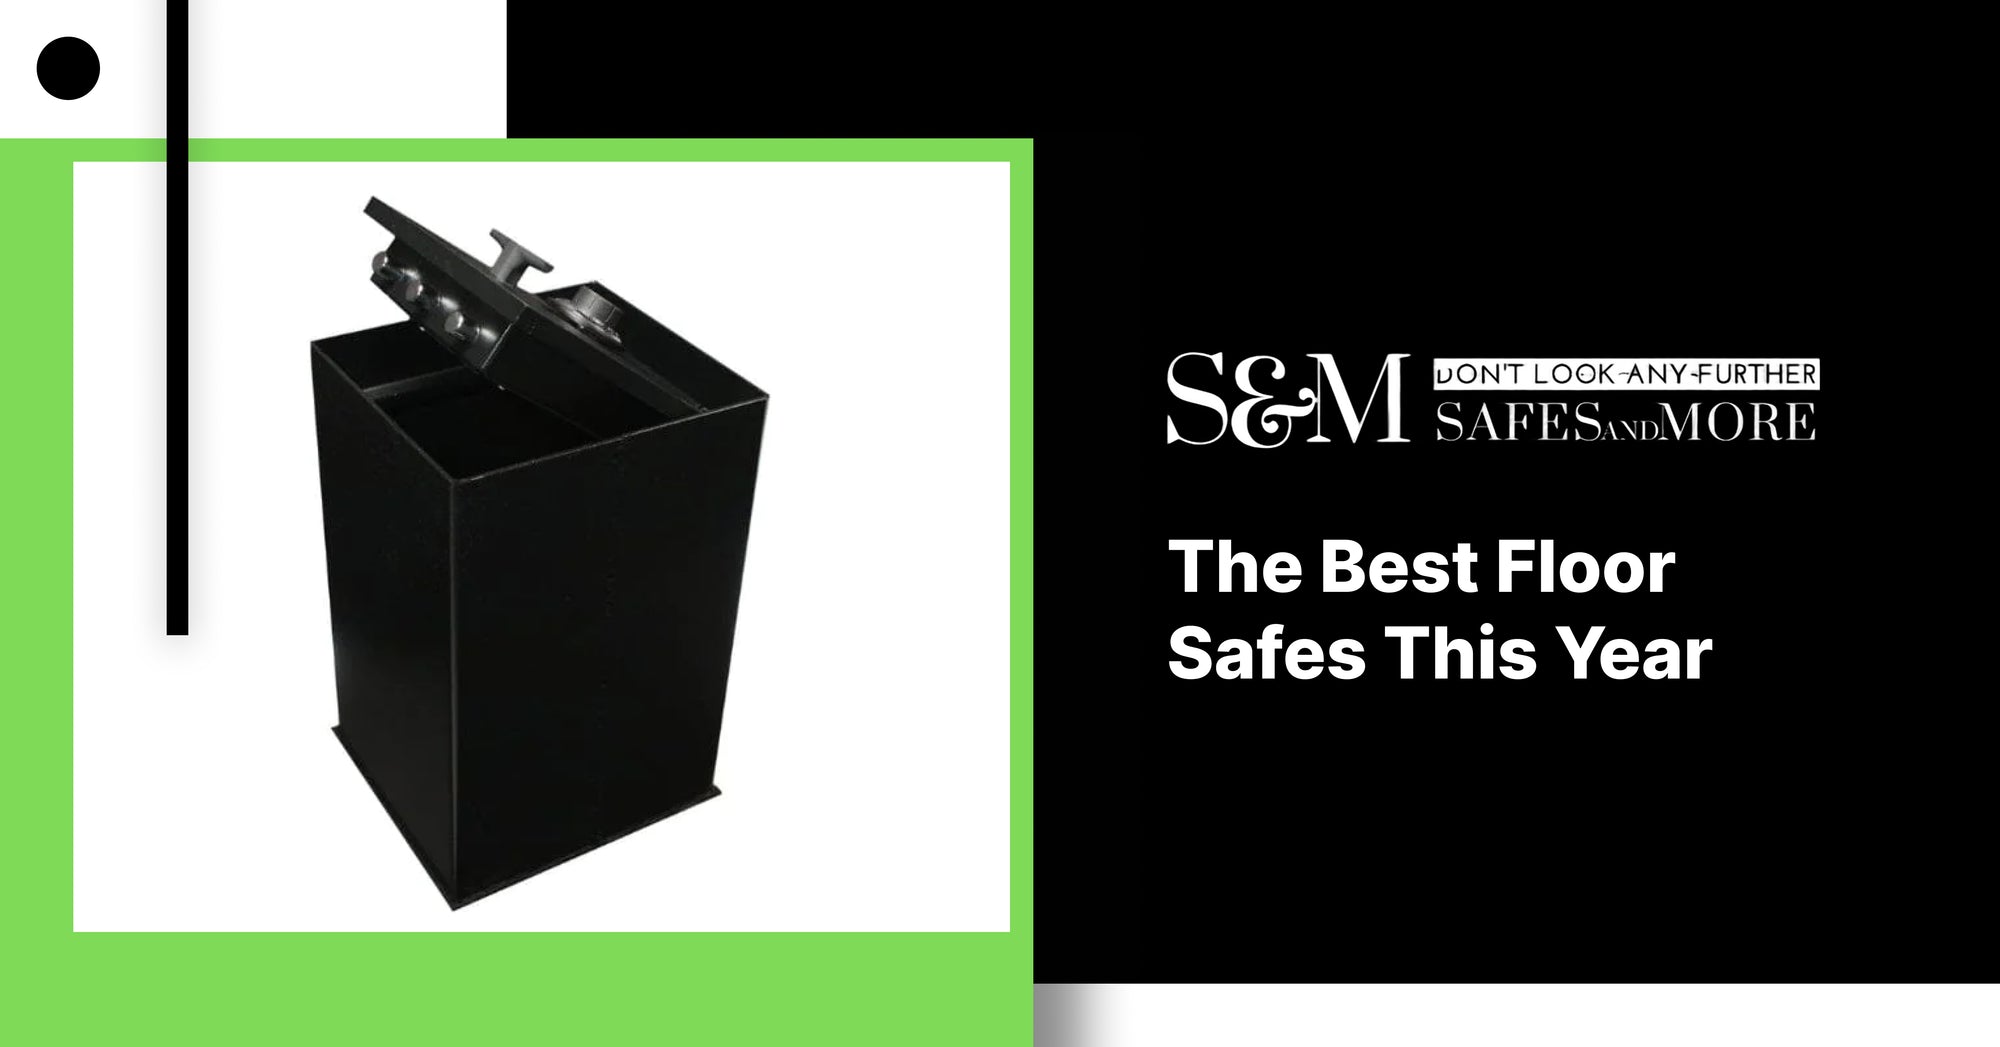 The Best Floor Safes This Year